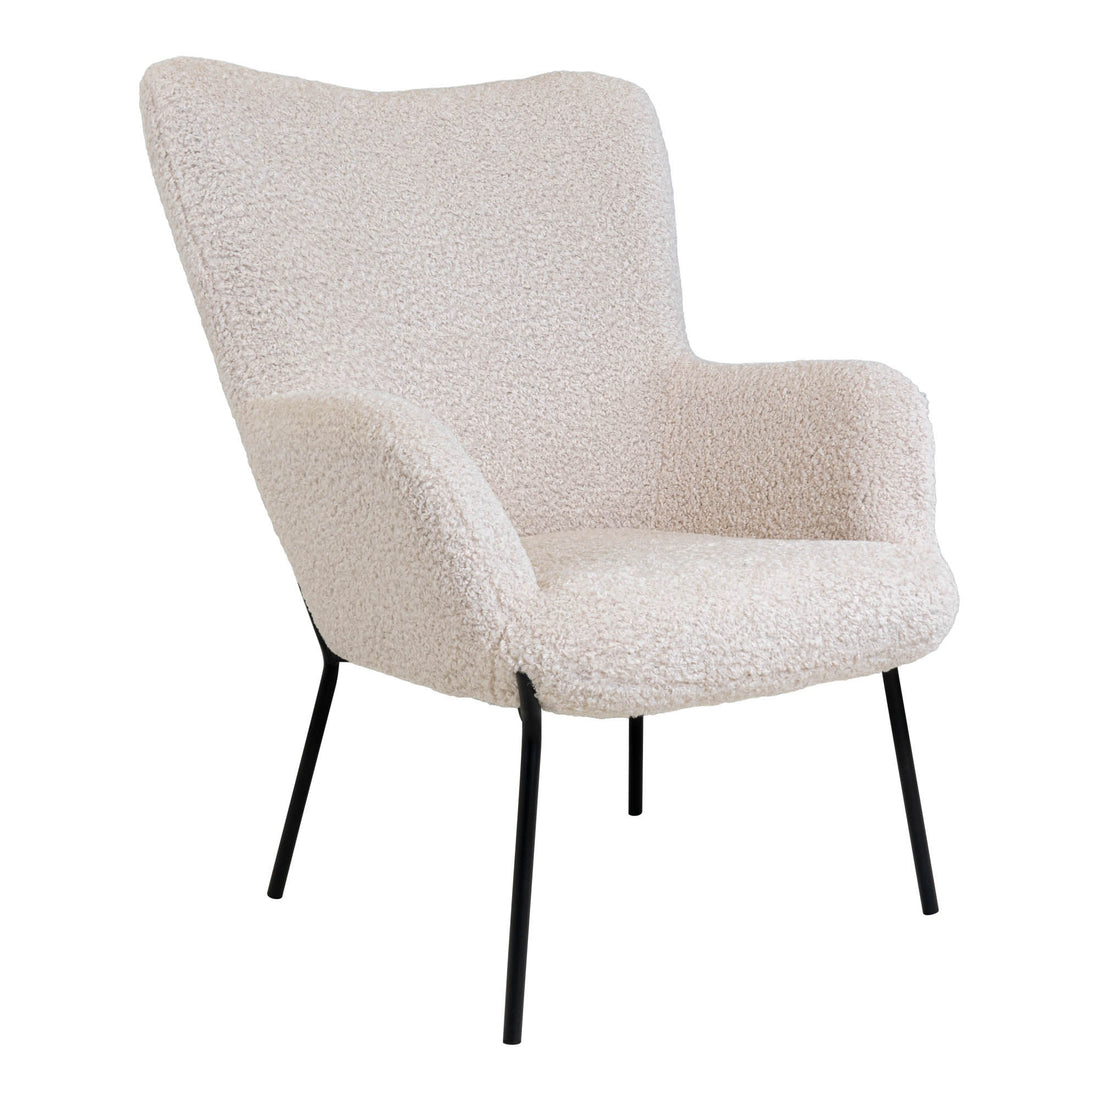 Glasgow Chair - Chair in White Artificial Lambskin with Black Ben - 1 - PCS